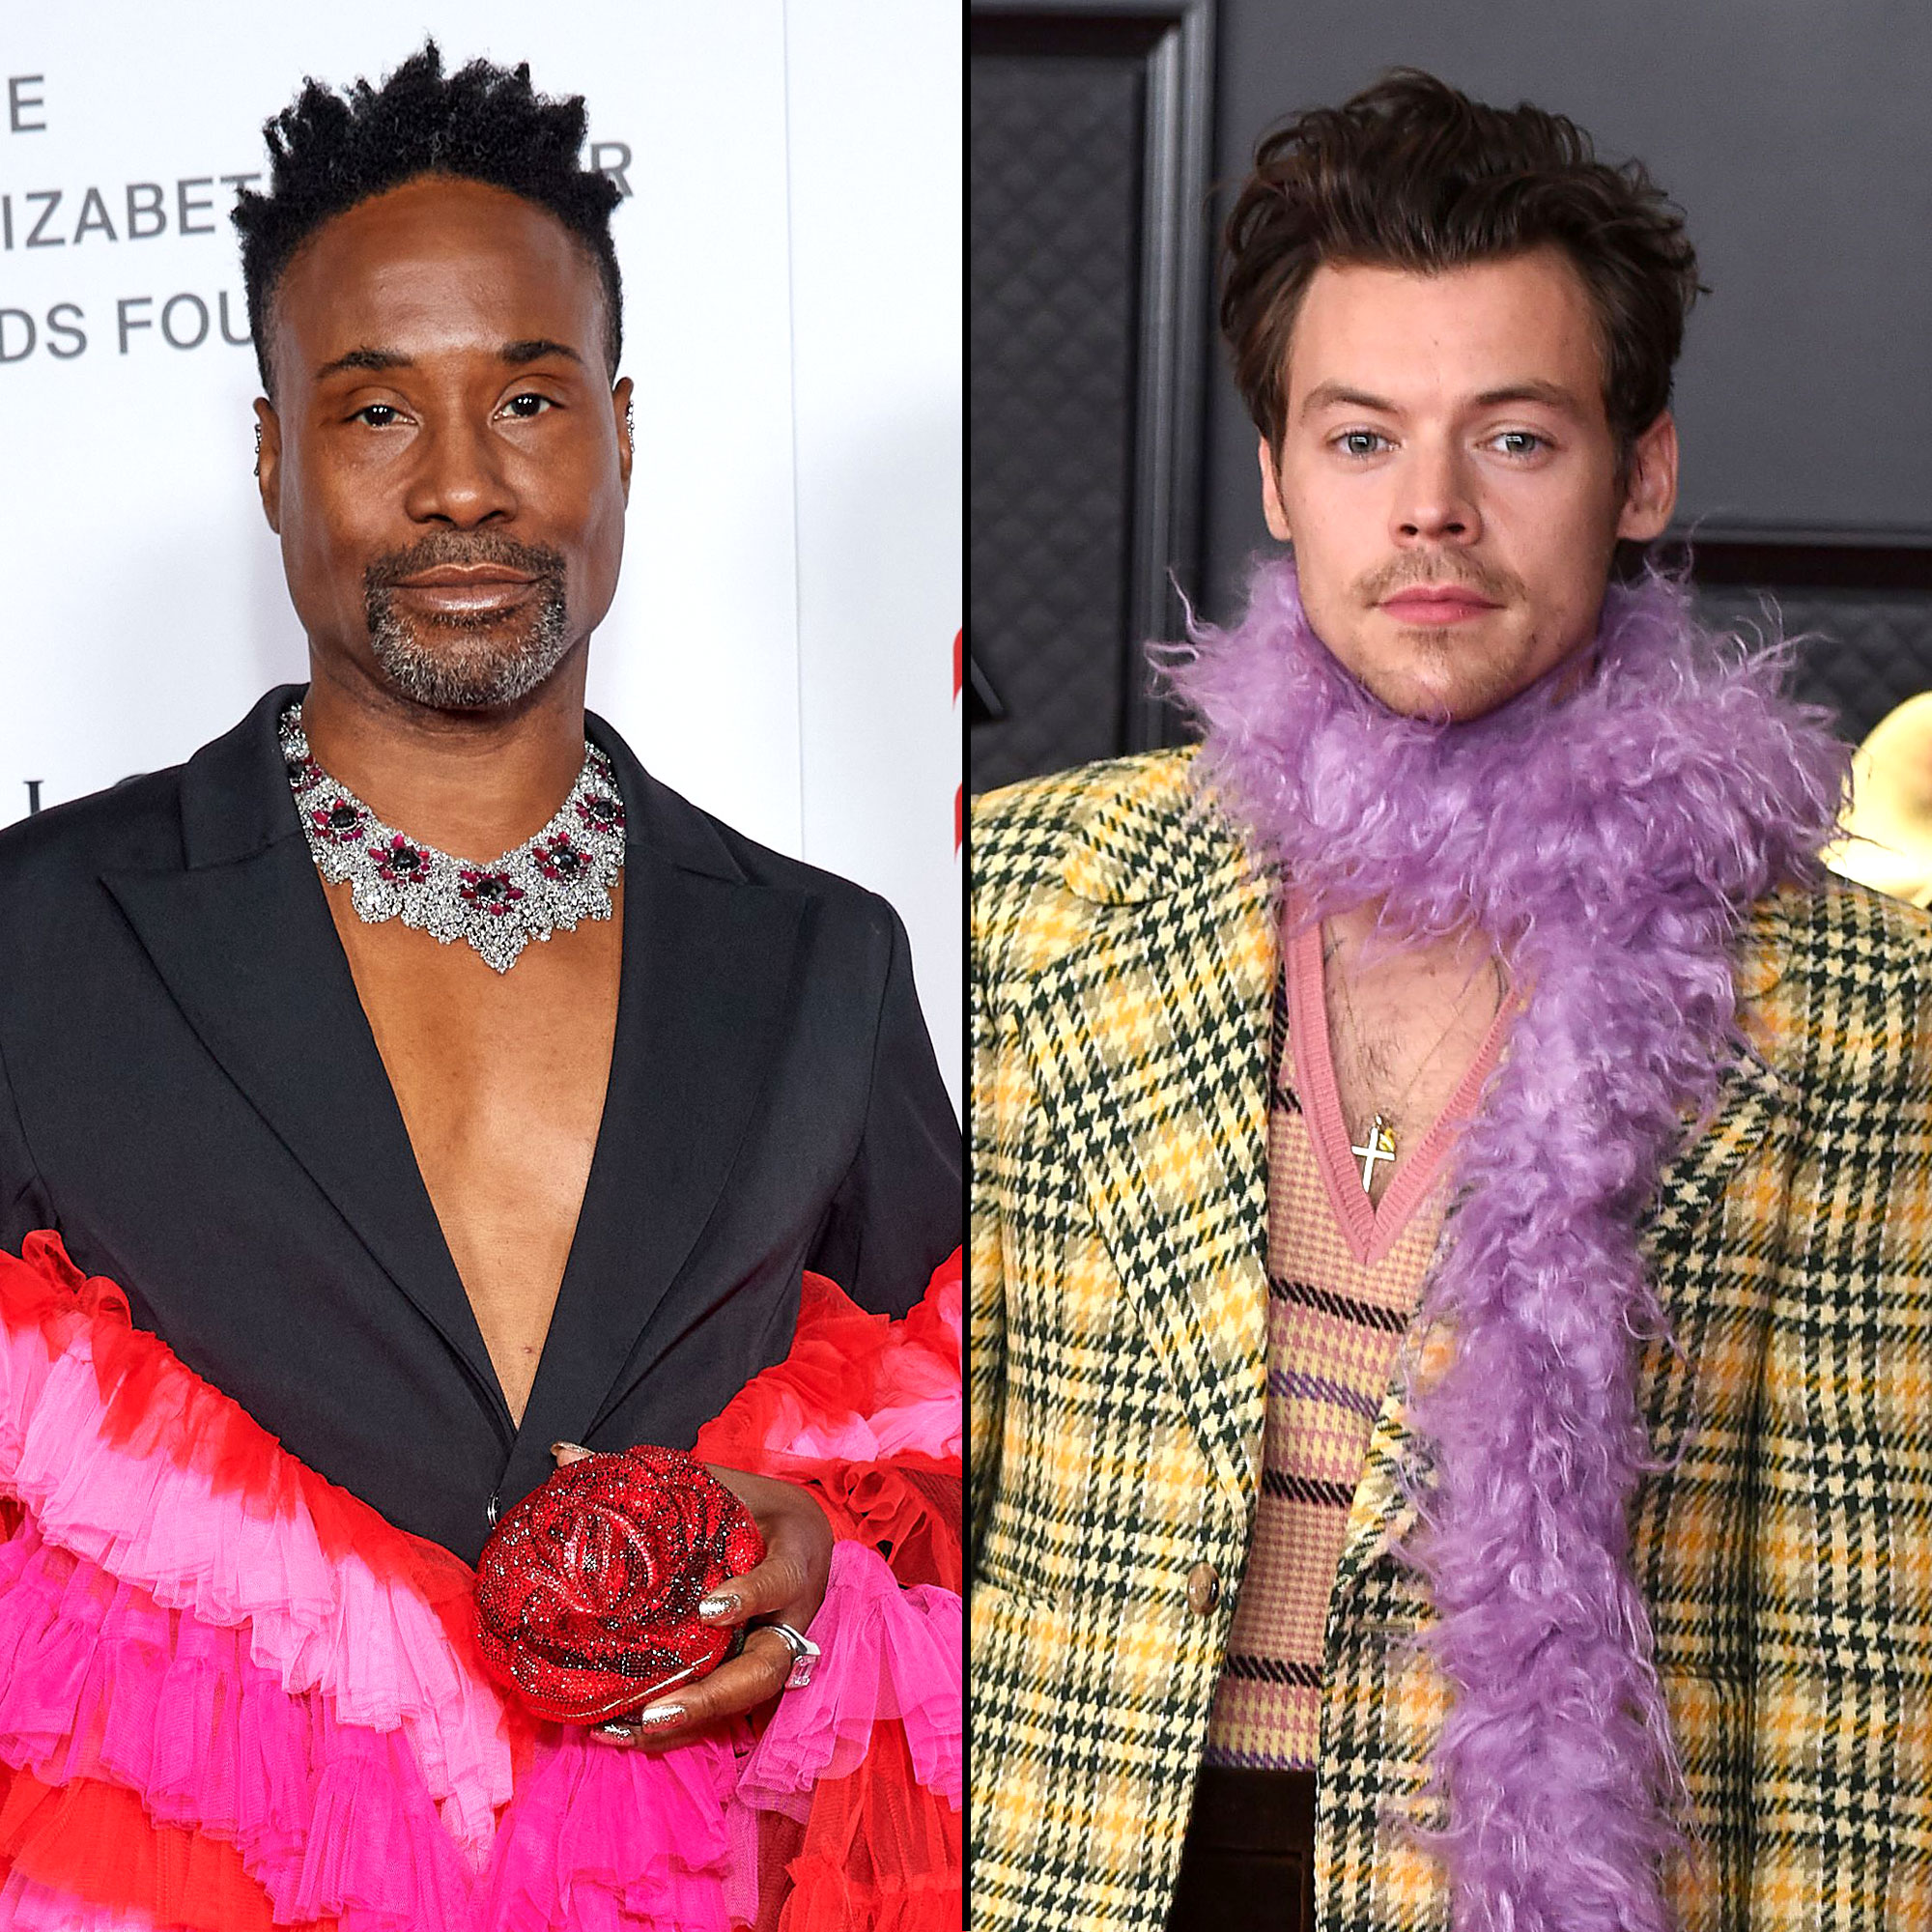 Harry Styles' Most Fashion Forward Looks Are What Make Him Beautiful